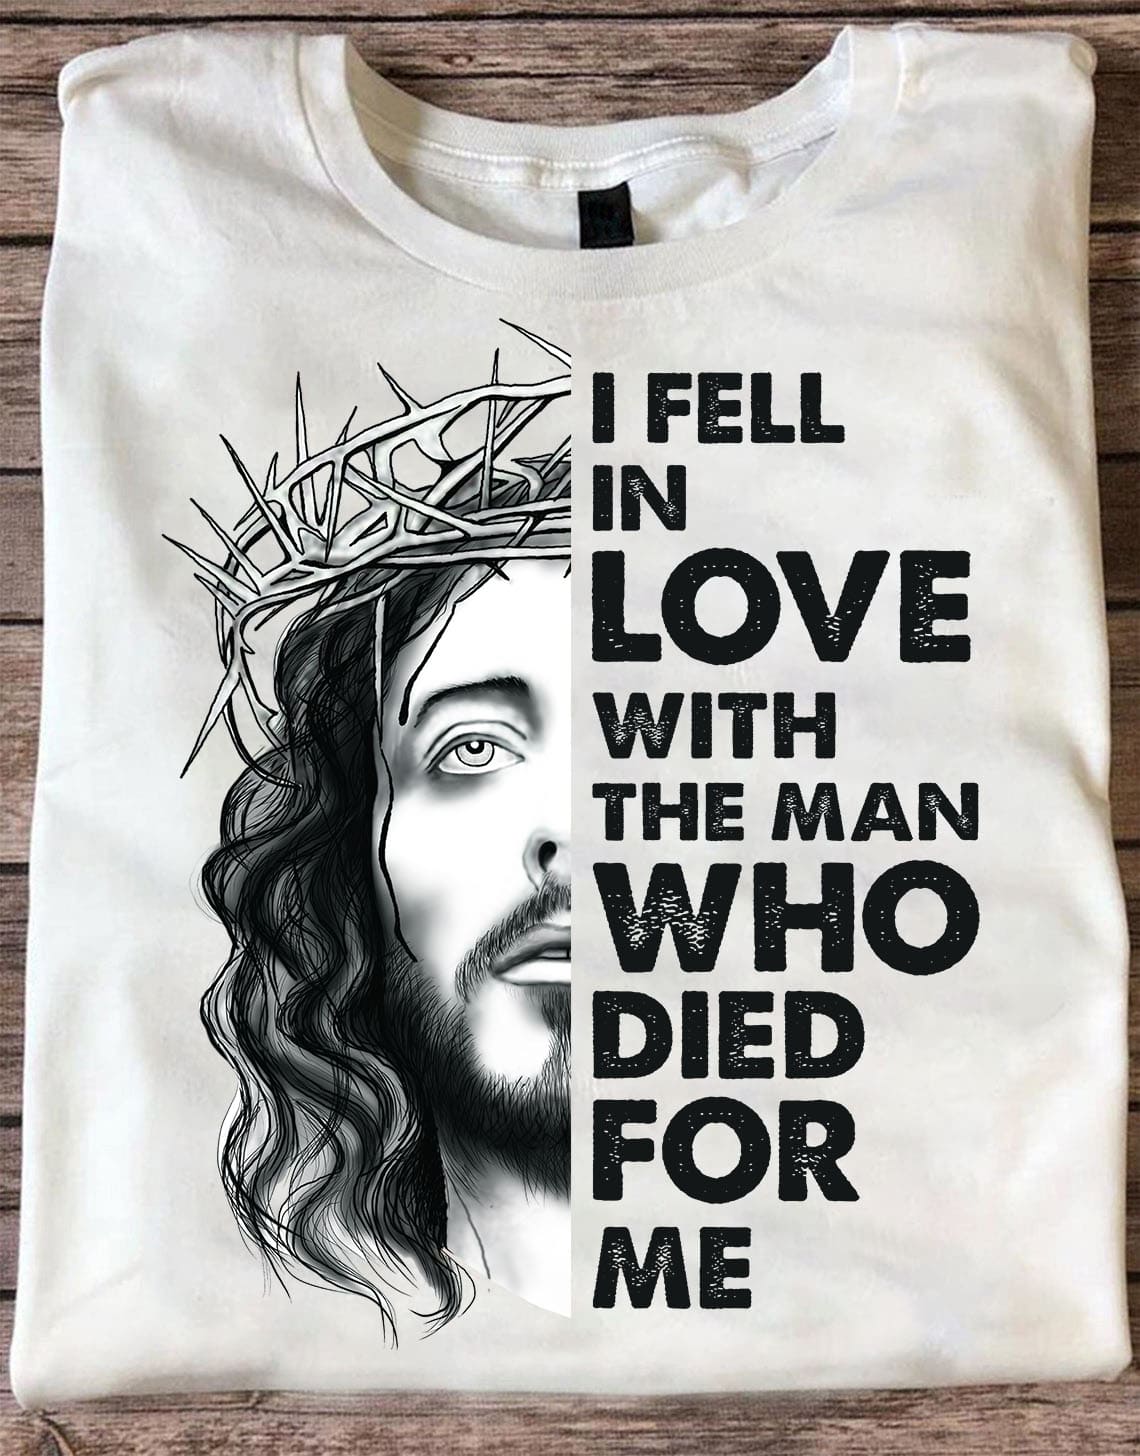 Jesus Christ - I fell in love with the man who died for me